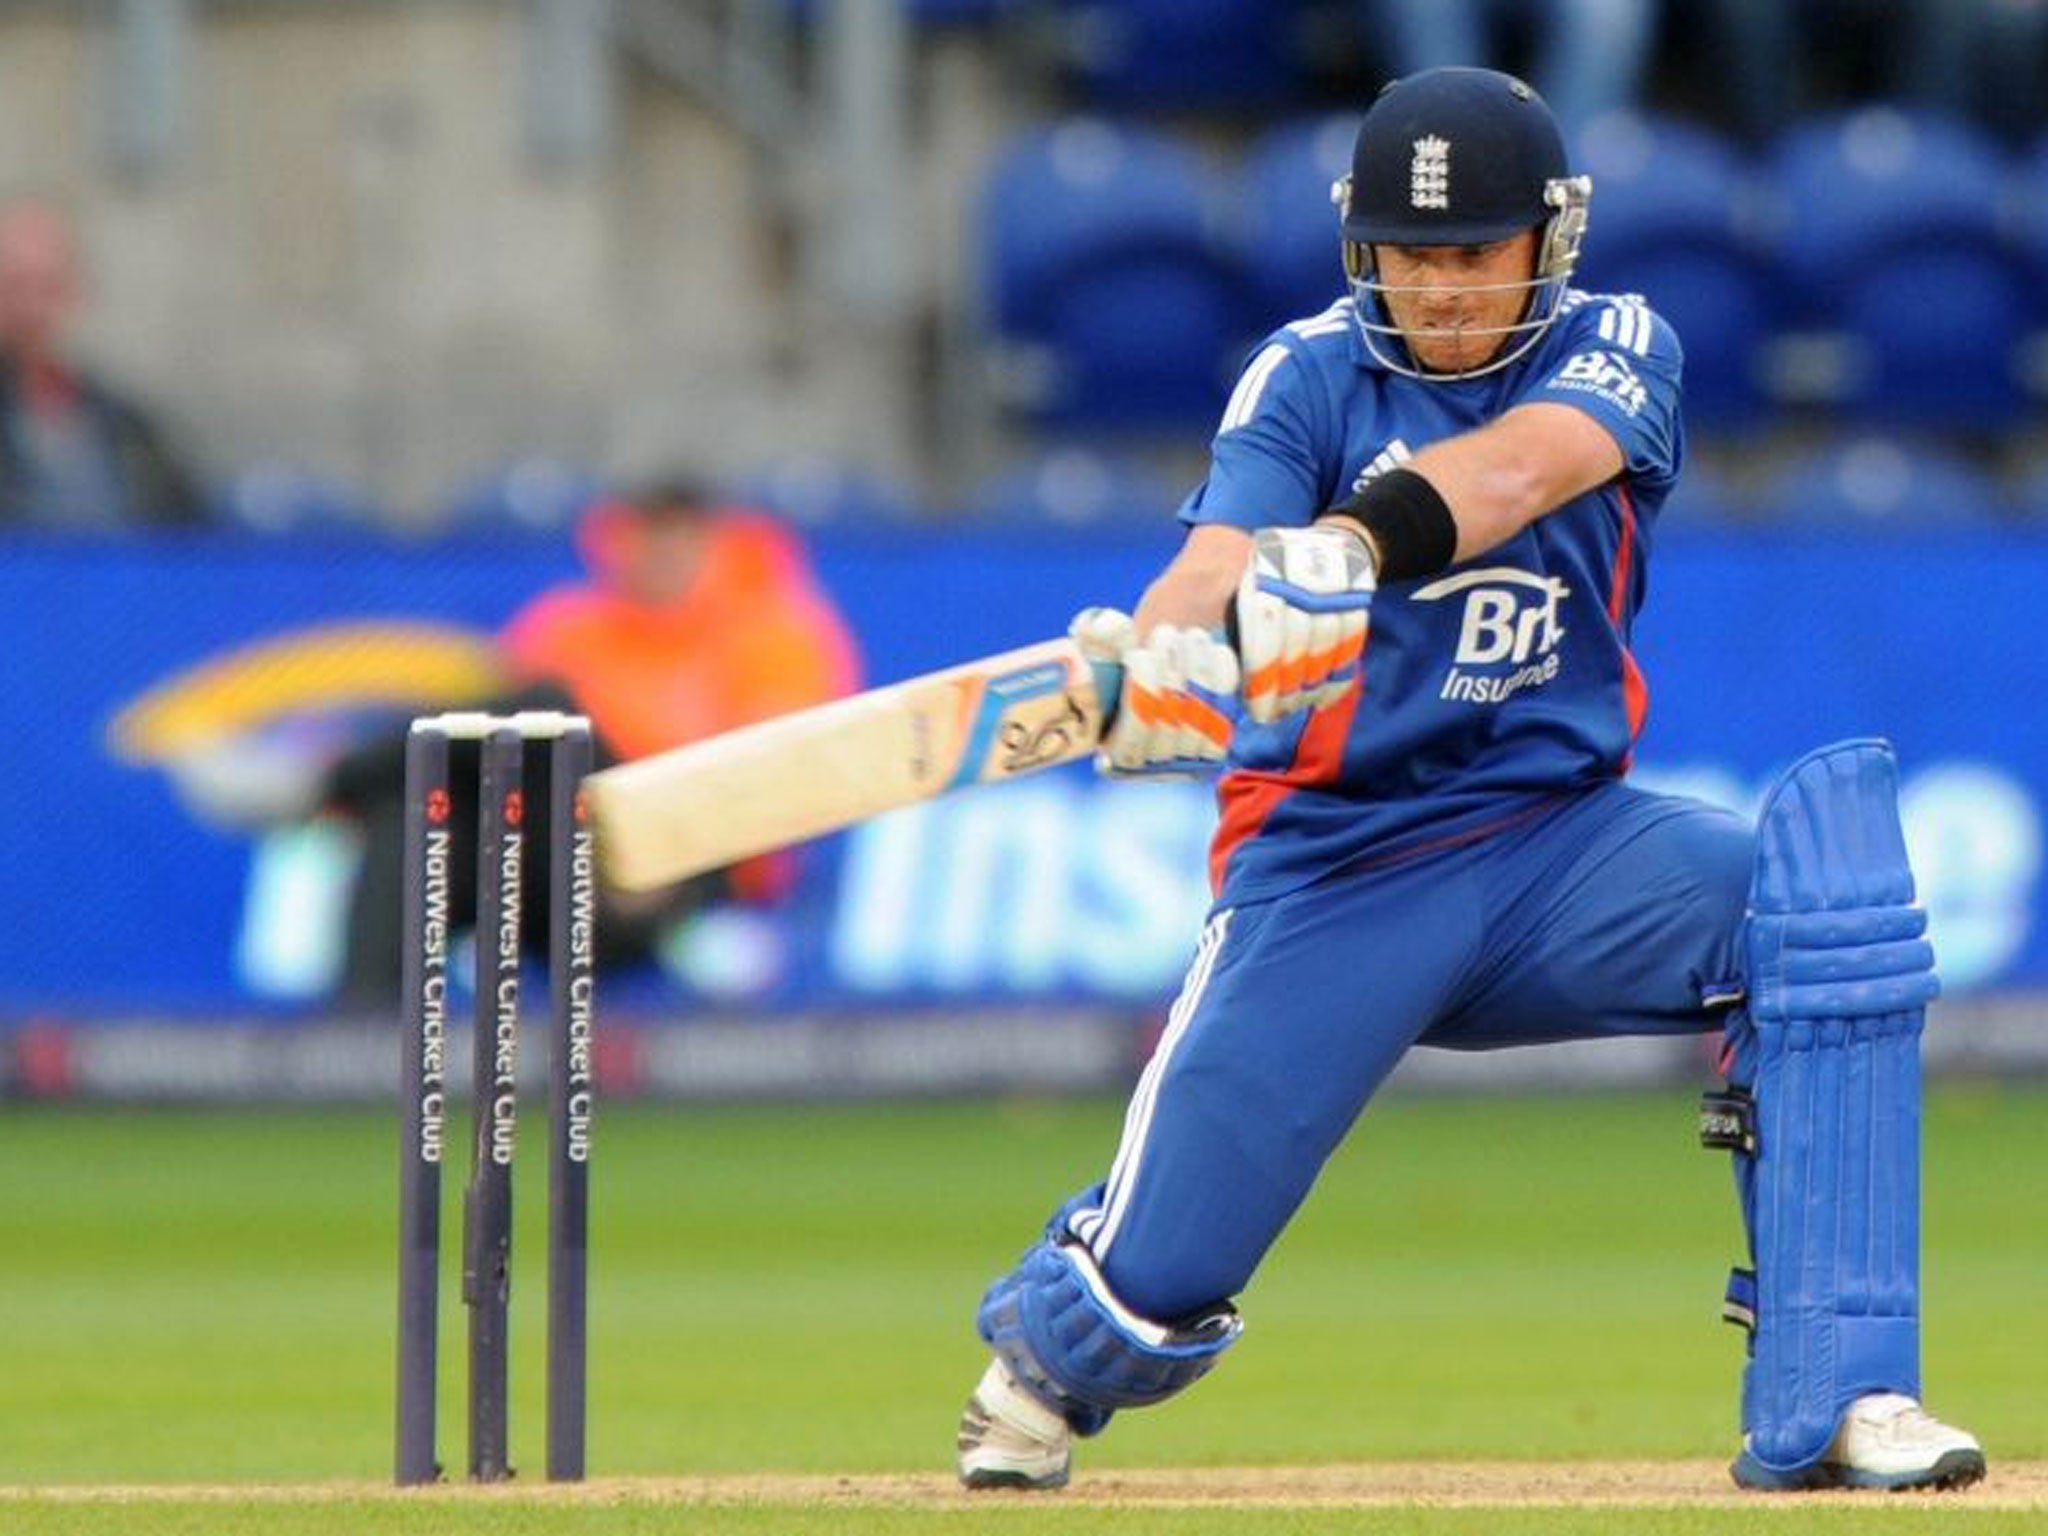 Ian Bell guided England home with his third ODI century